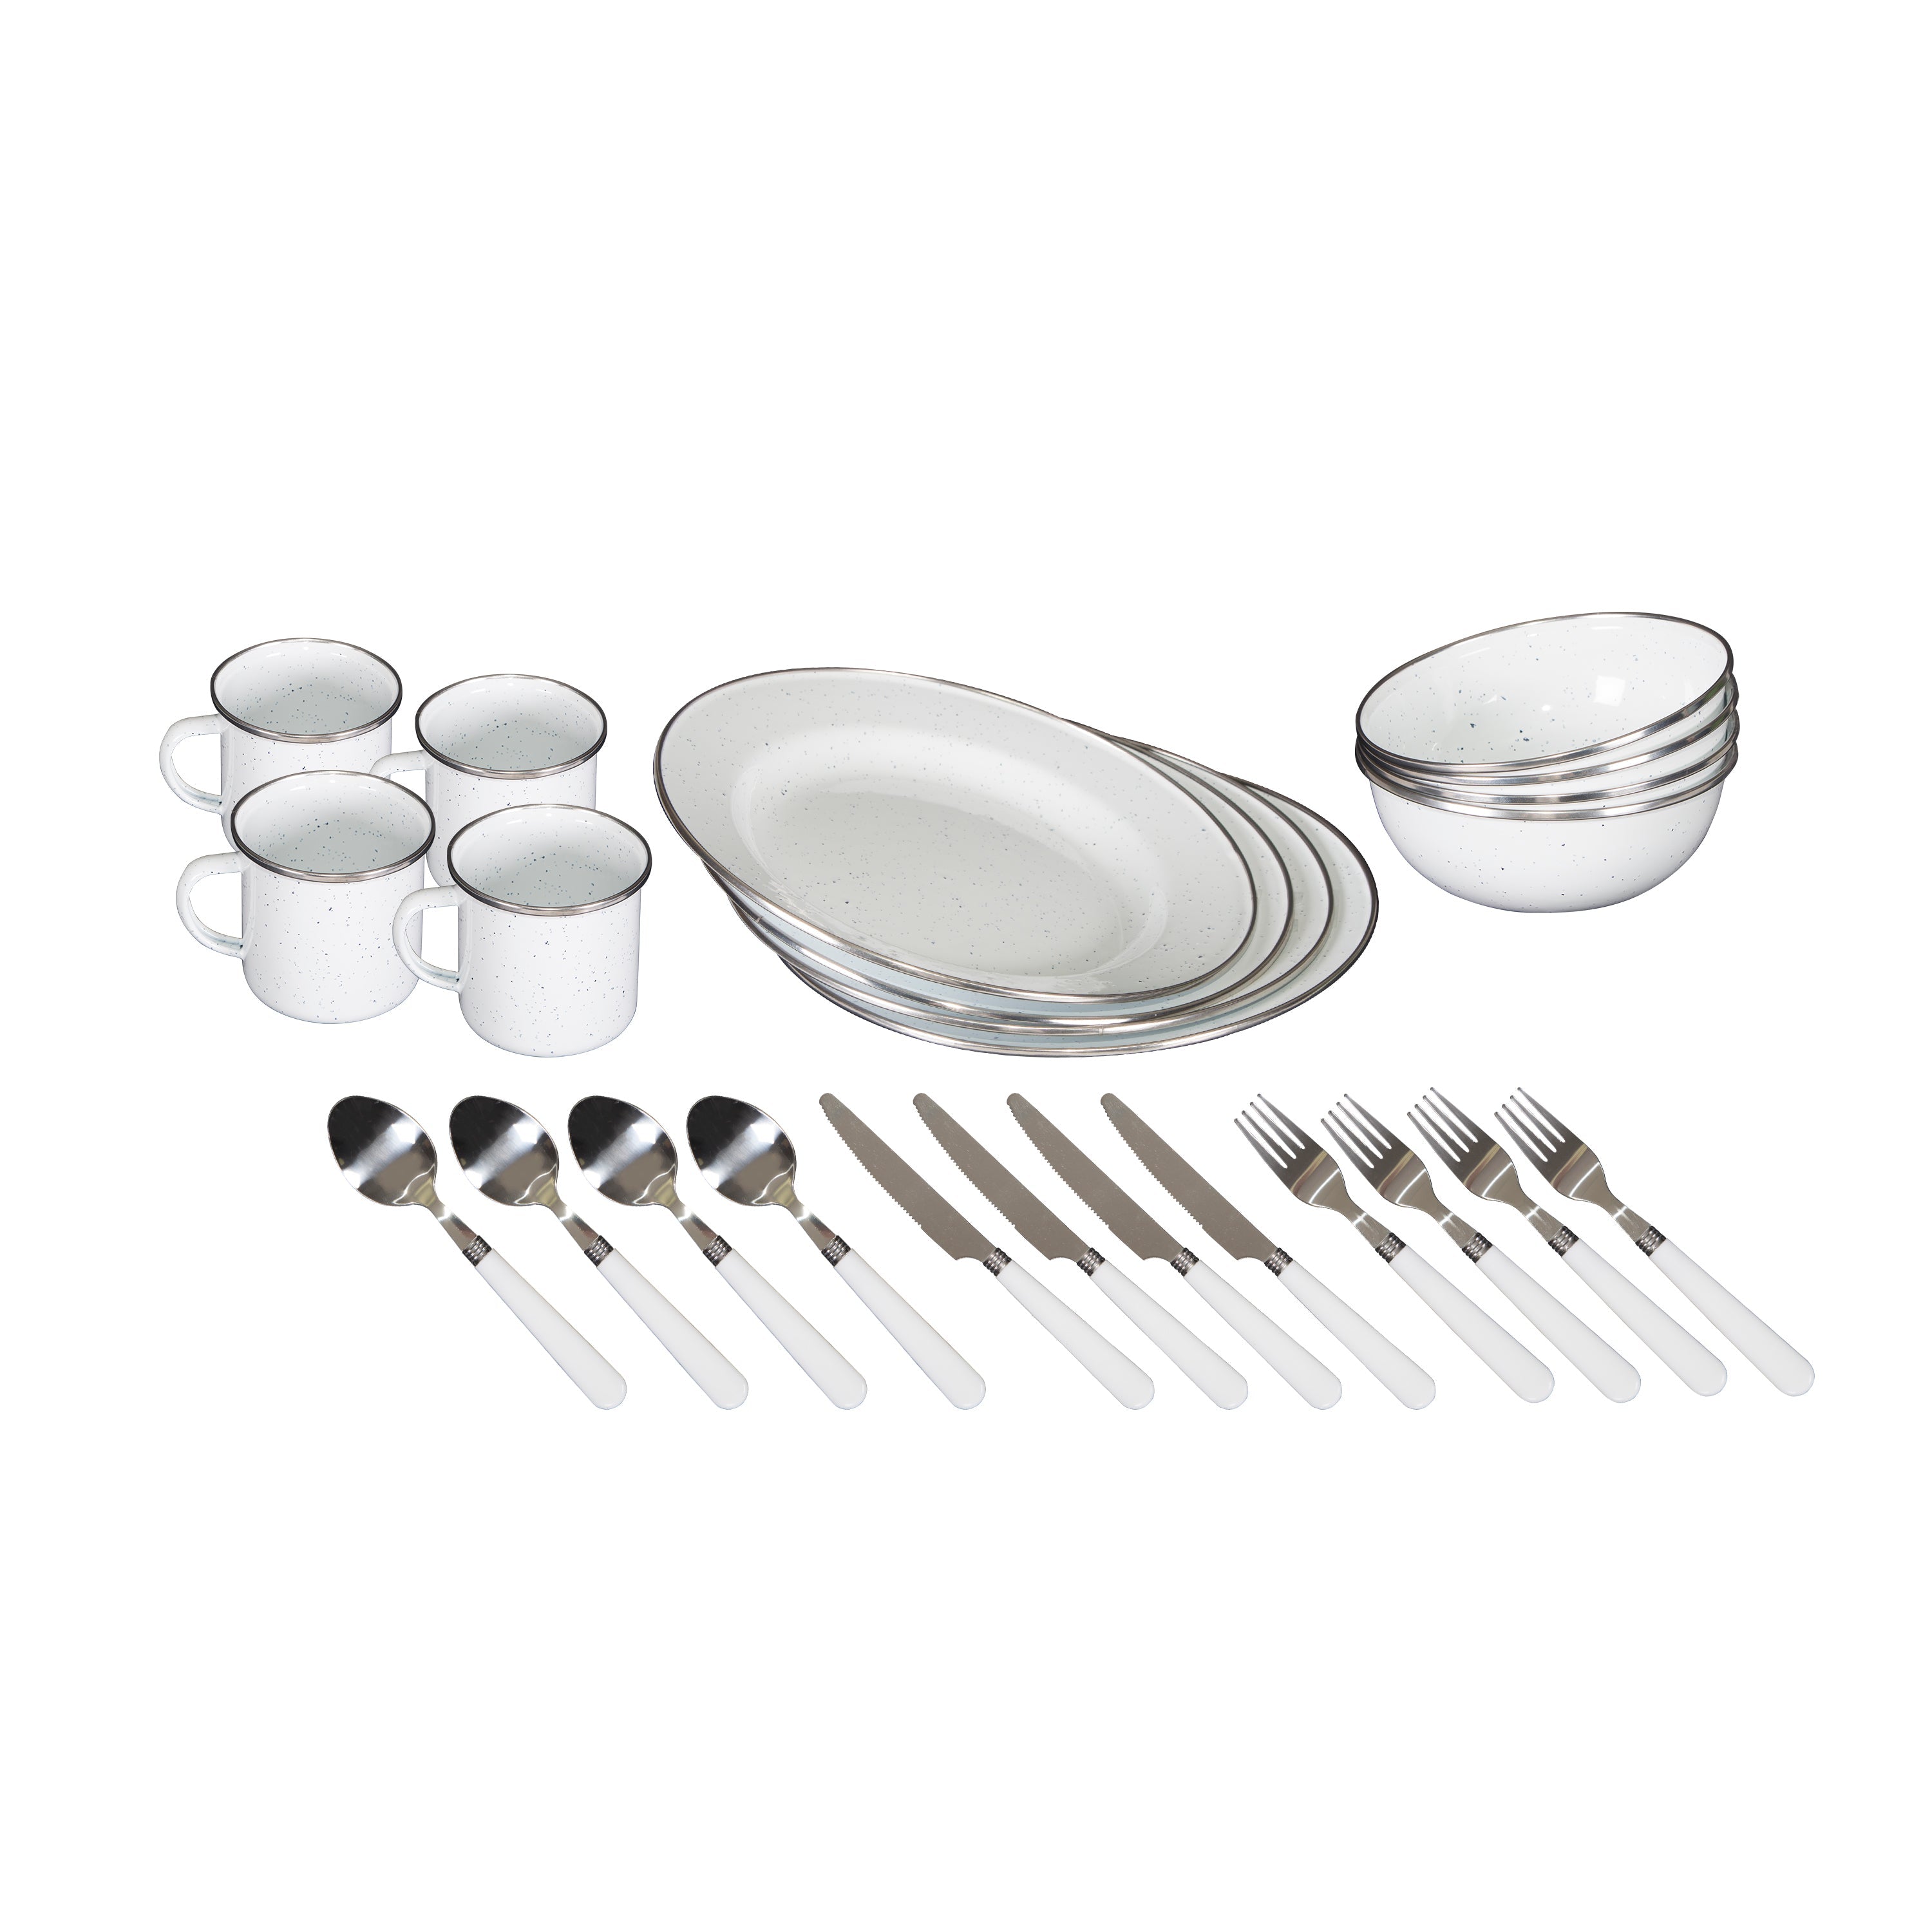 Enamel Camping Tableware Set-24 Pieces-White With Blue Specs